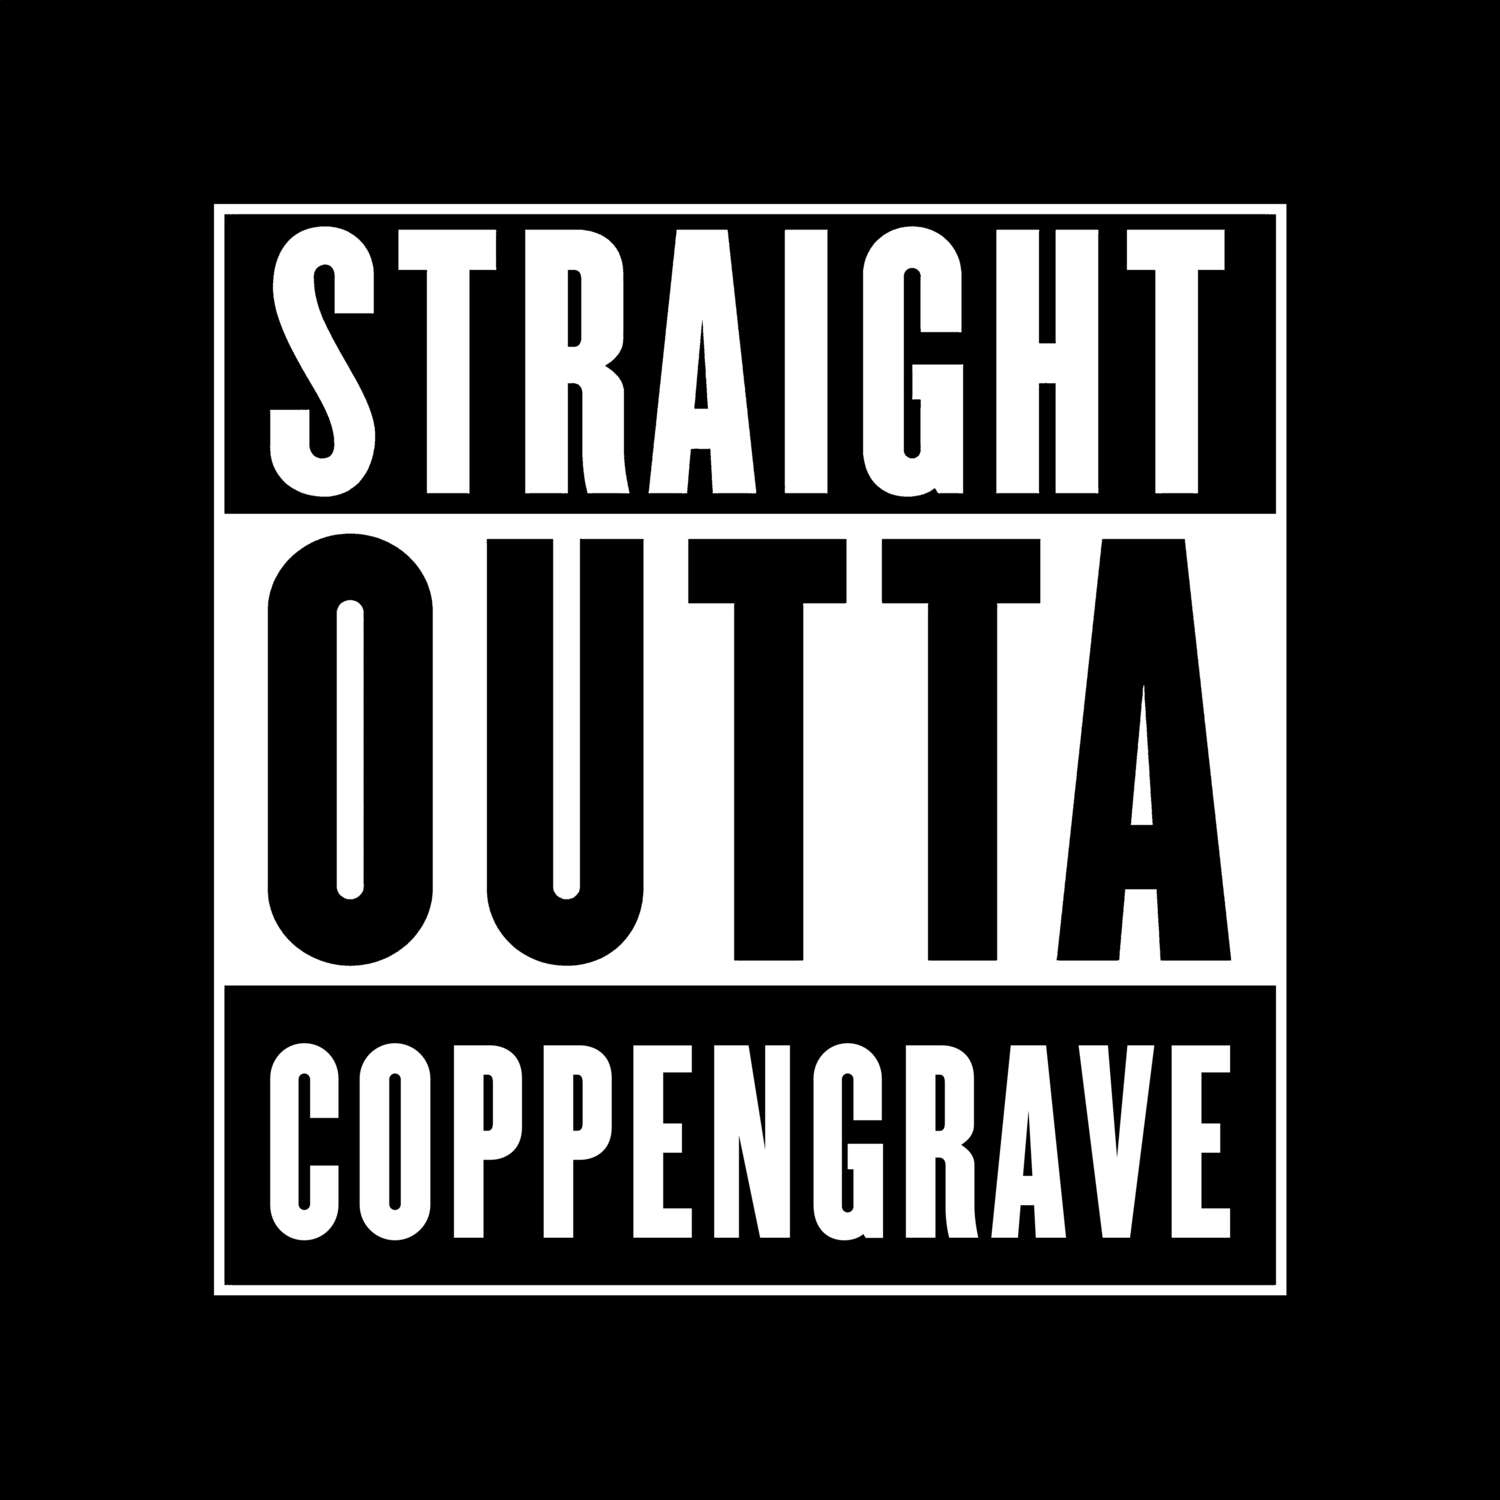 Coppengrave T-Shirt »Straight Outta«